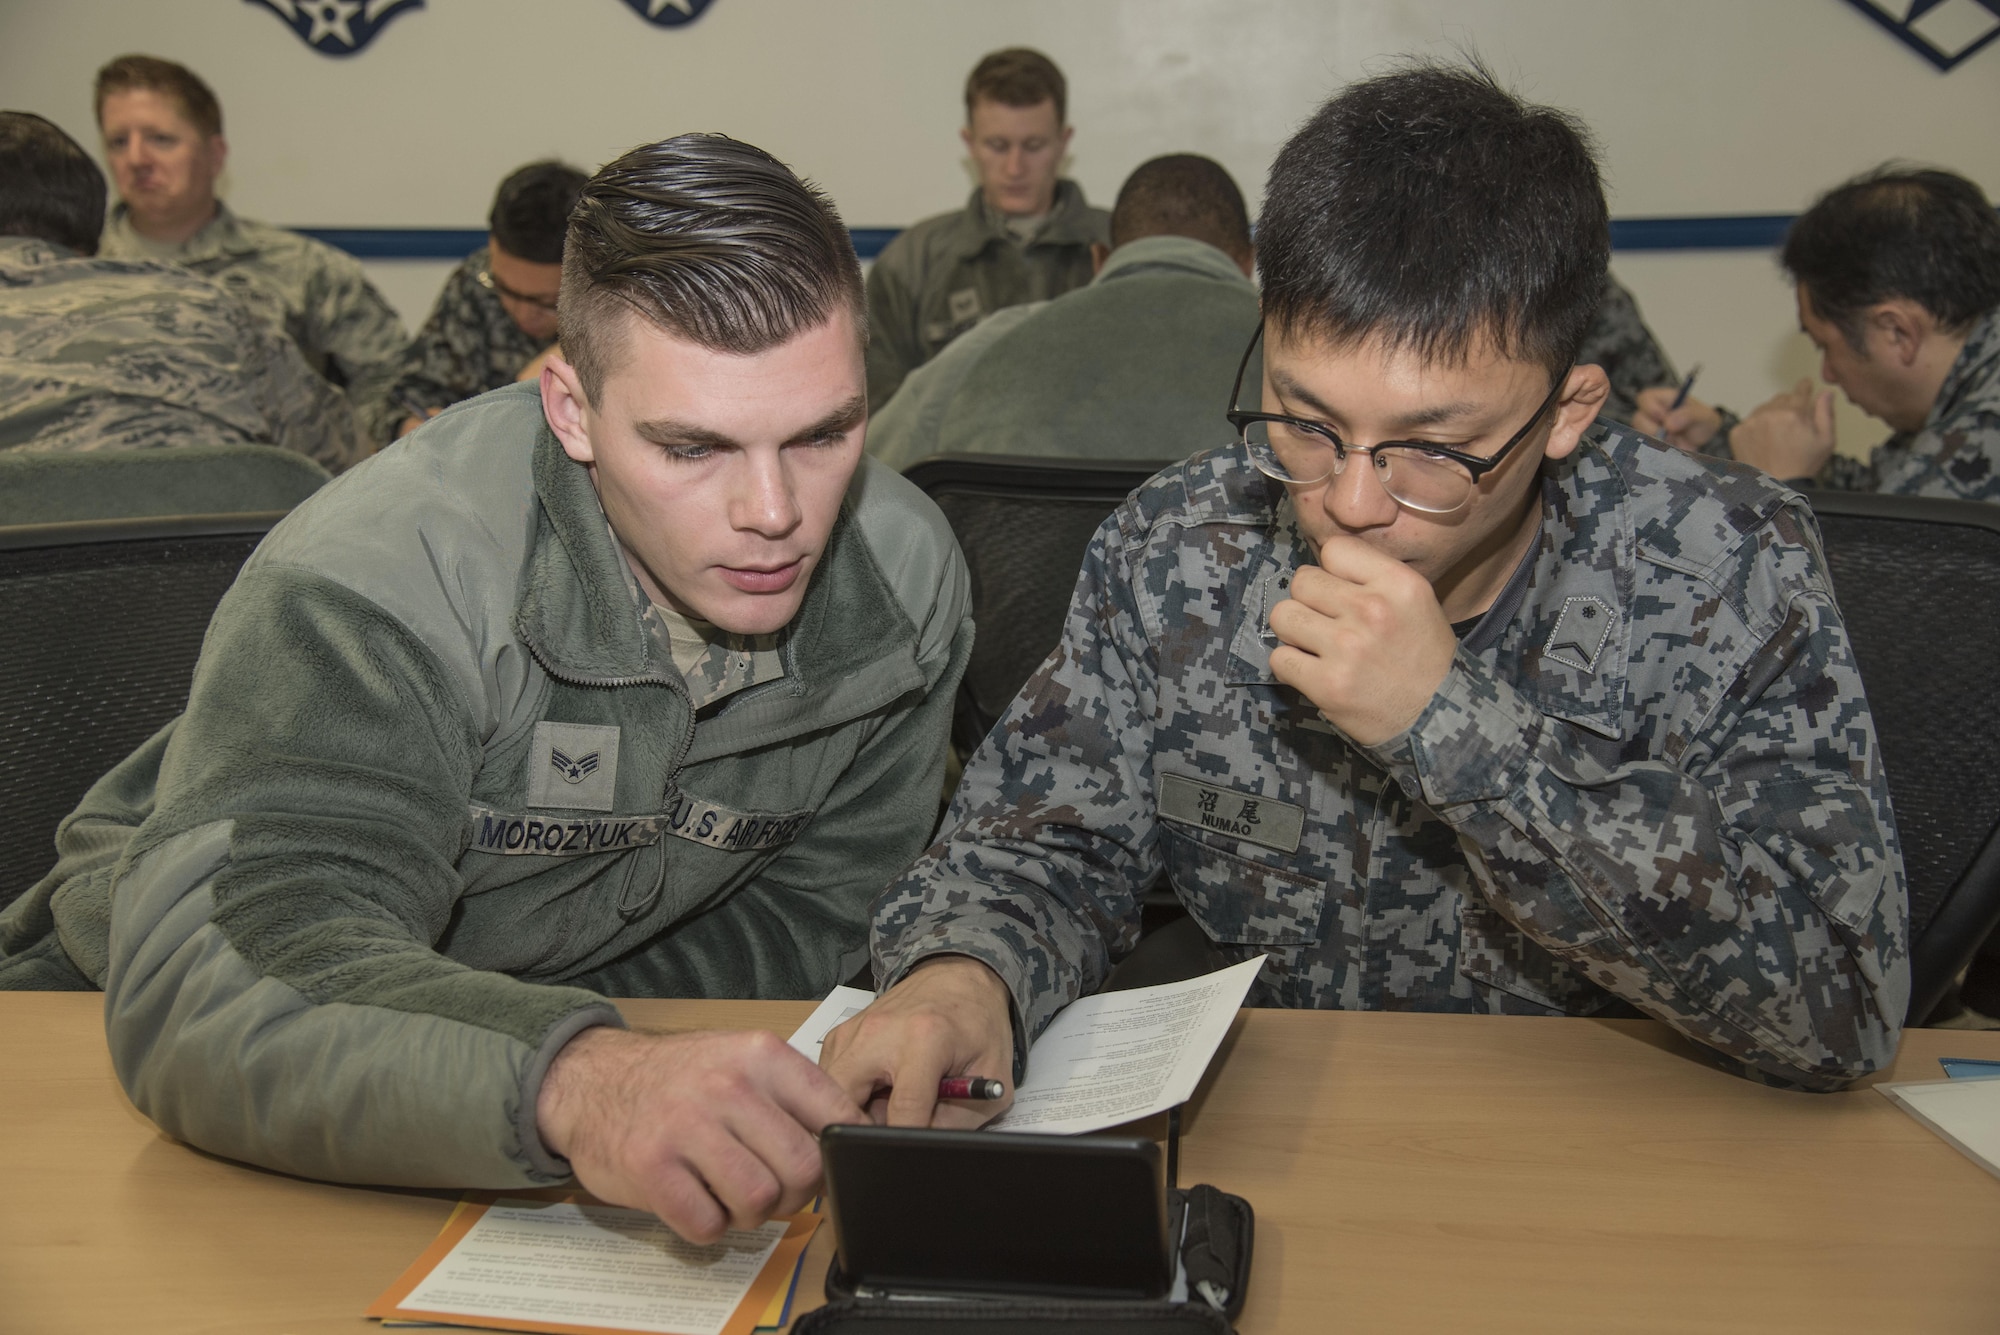 U.S. Air Force Senior Airman Kostyantyn Morozyuk, a 14th Aircraft Maintenance Unit crew chief, works with Japan Air Self-Defense Force Staff Sgt. Tomoyuki Numao, a 3rd Air Wing crew chief, during a "4 Lenses" exercise at Misawa Air Base, Japan, Nov. 30, 2016. The "4 Lenses" test is a proven personality assessment which helps organizations build understanding of the innate talent and potential of its individuals. Airmen and JASDF members were given a chance to work around language barriers while getting to know each other prior to working together during a bilateral exchange. (U.S. Air Force photo by Airman 1st Class Sadie Colbert)